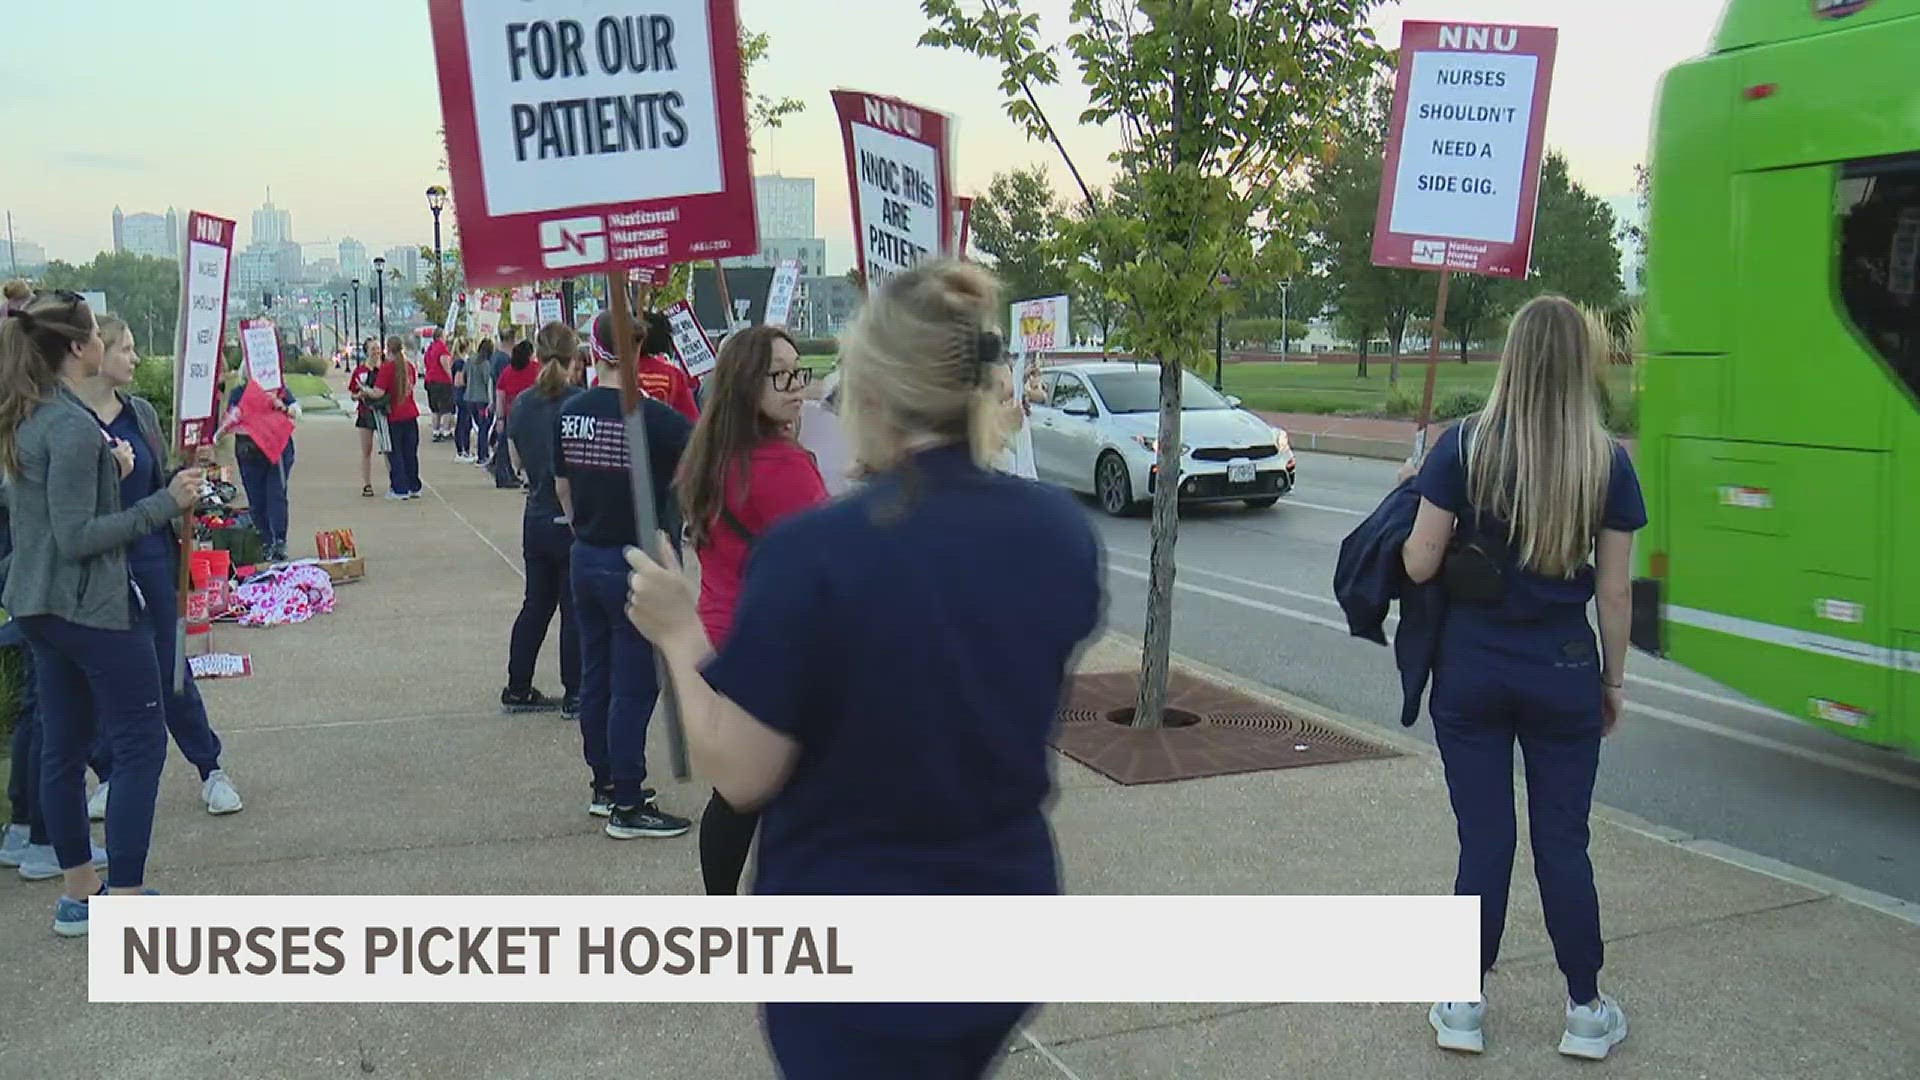 Workers say they are striking for not only patient safety but the safety of nurses as well. Nurse retention is another concern among picketers.